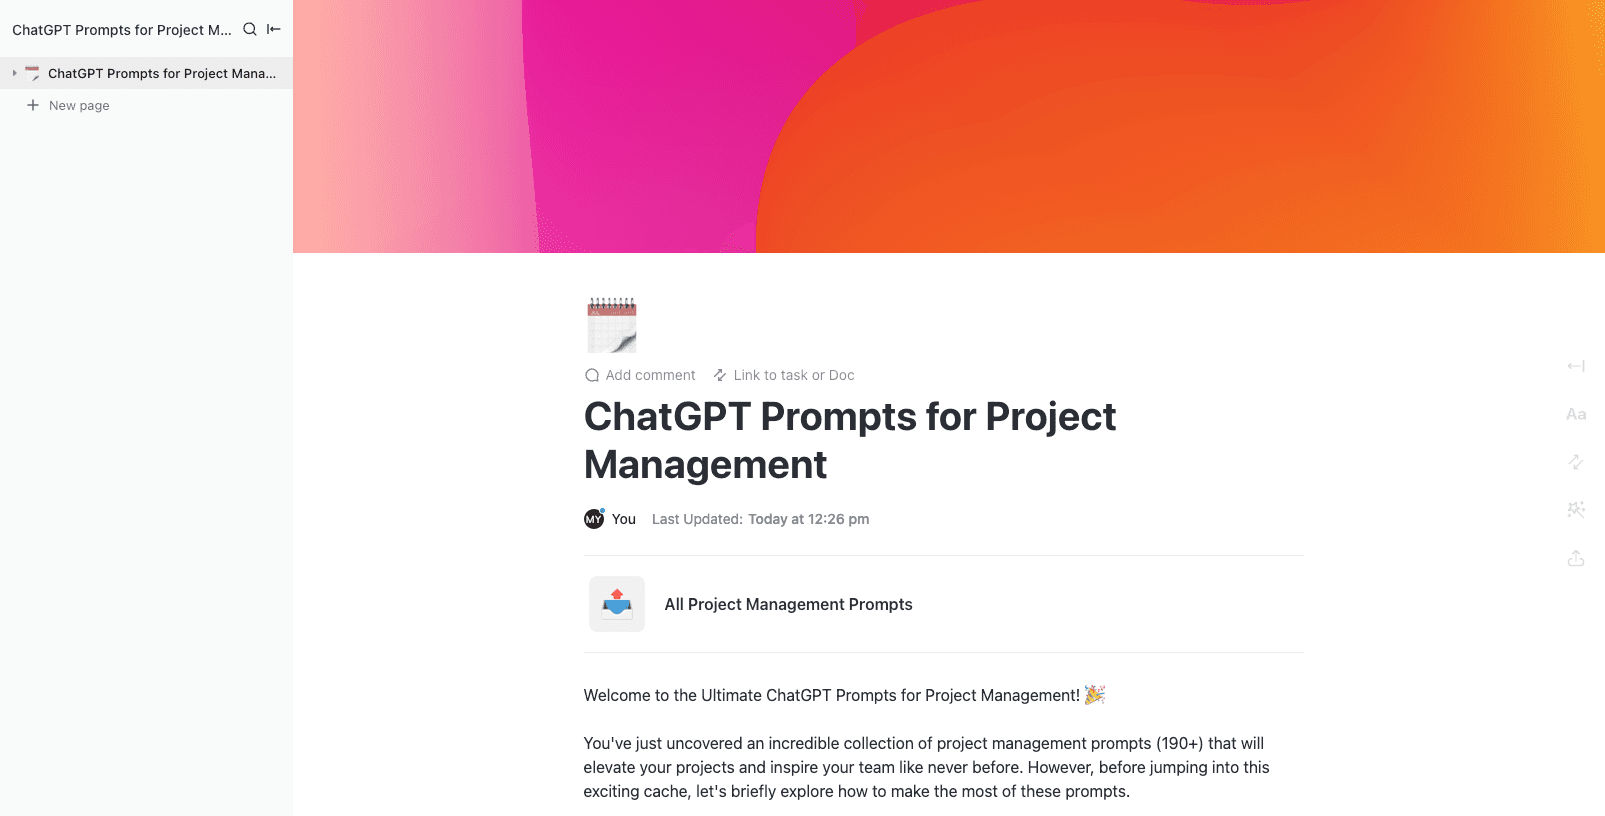 You've just uncovered an incredible collection of project management prompts (190+) that will elevate your projects and inspire your team like never before. 